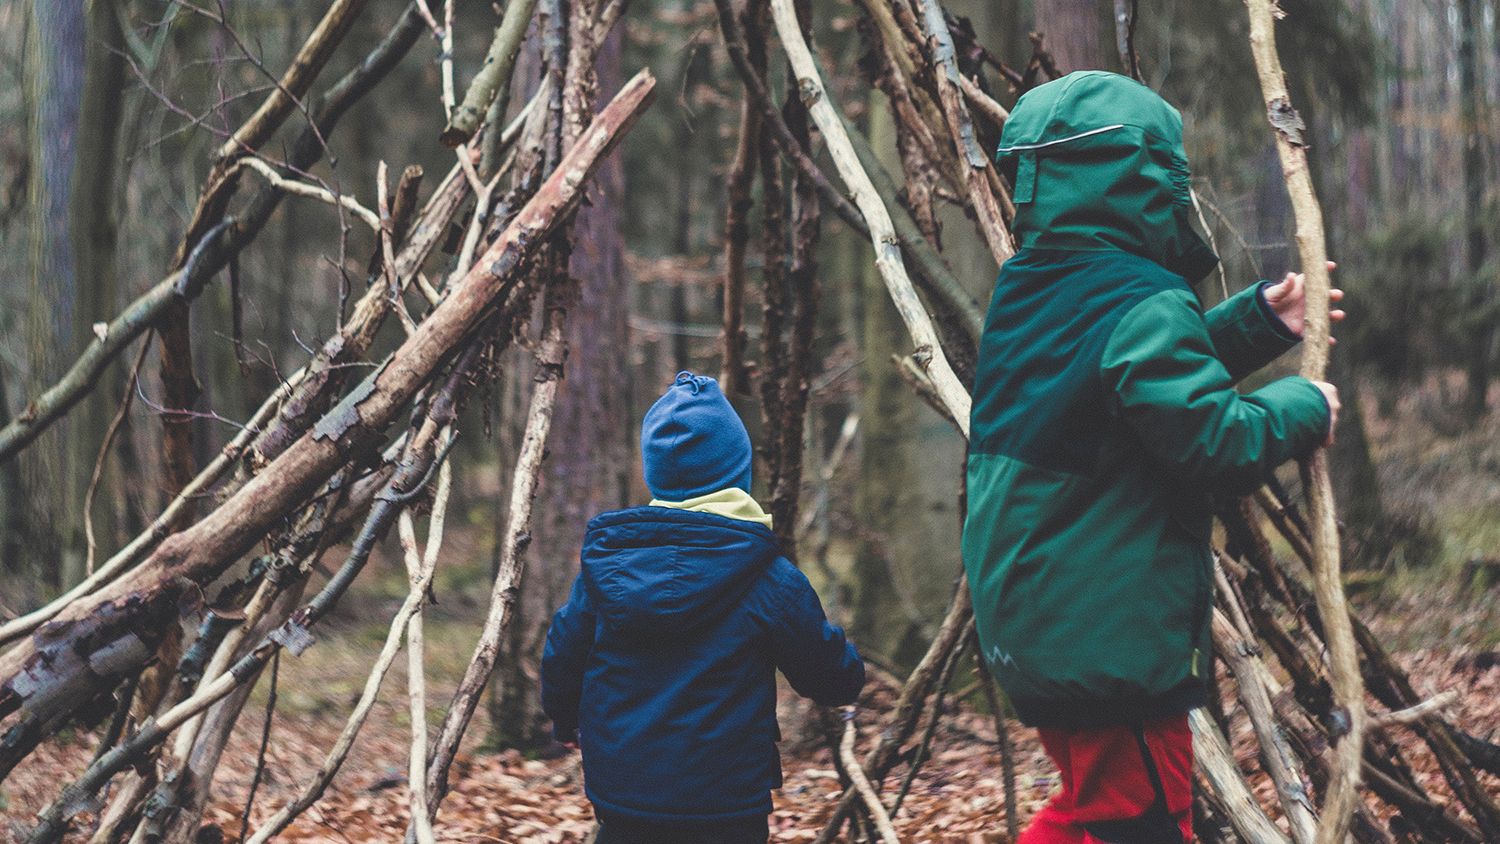 Two children building a stick structure in the woods